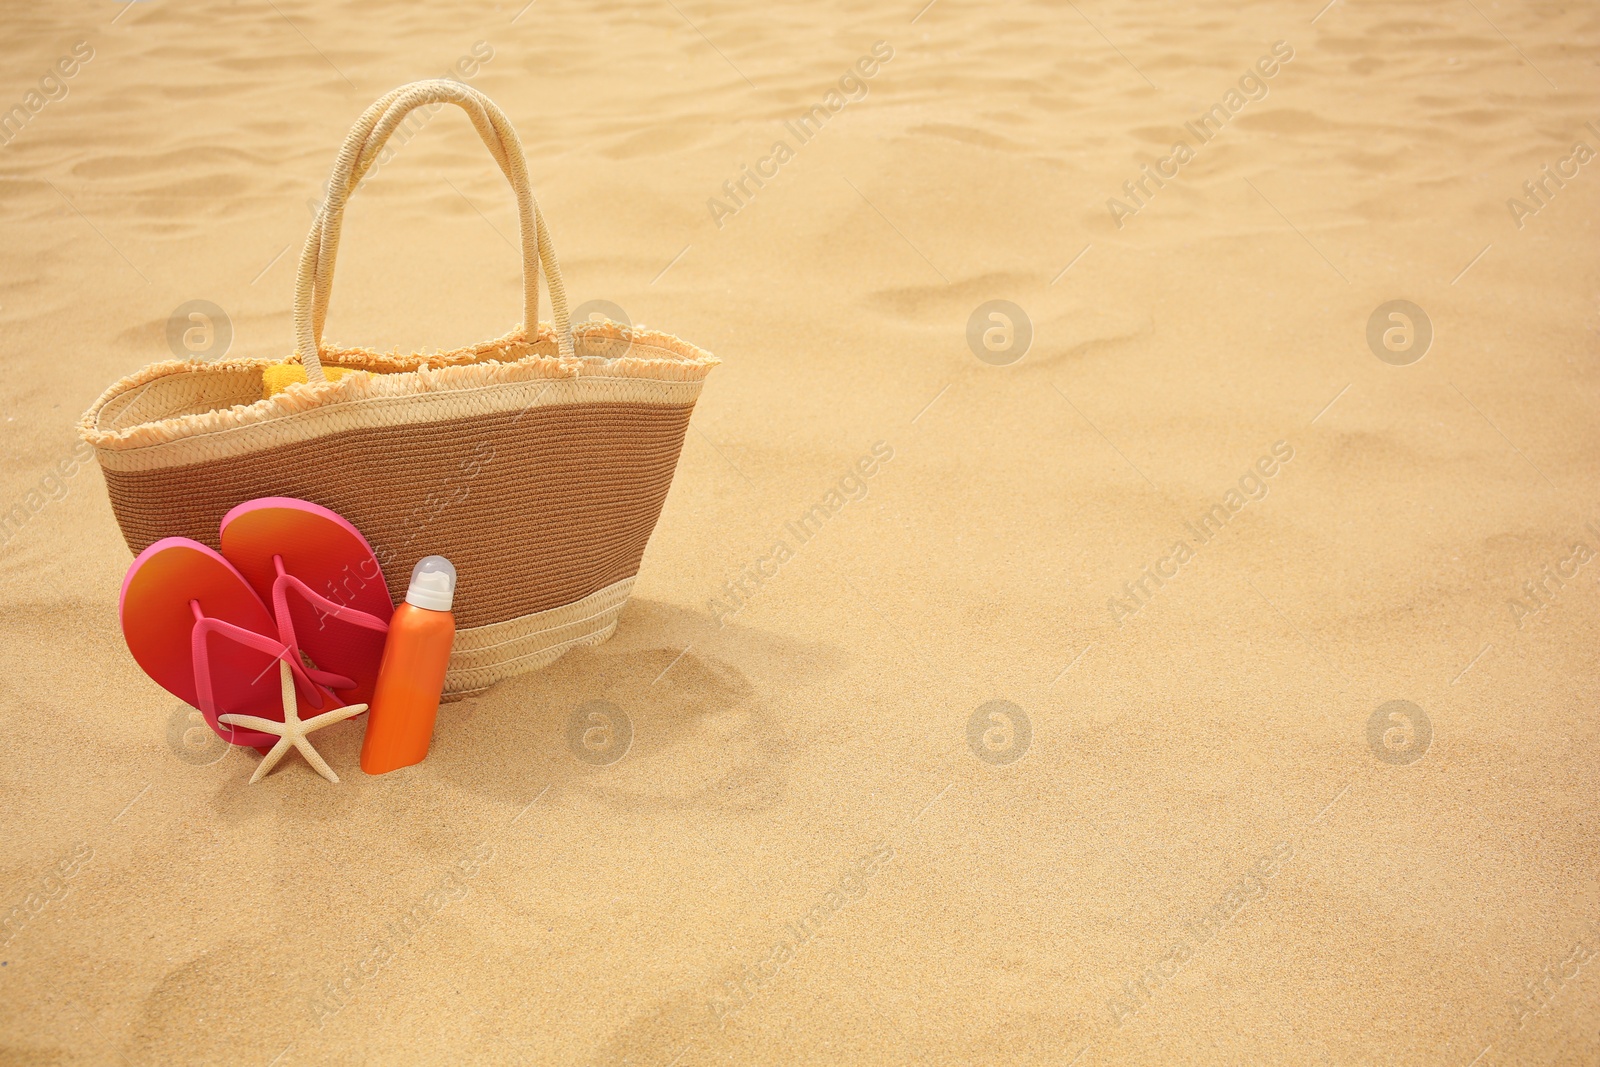 Photo of Straw bag, flip flops, starfish and sunscreen on sand, space for text